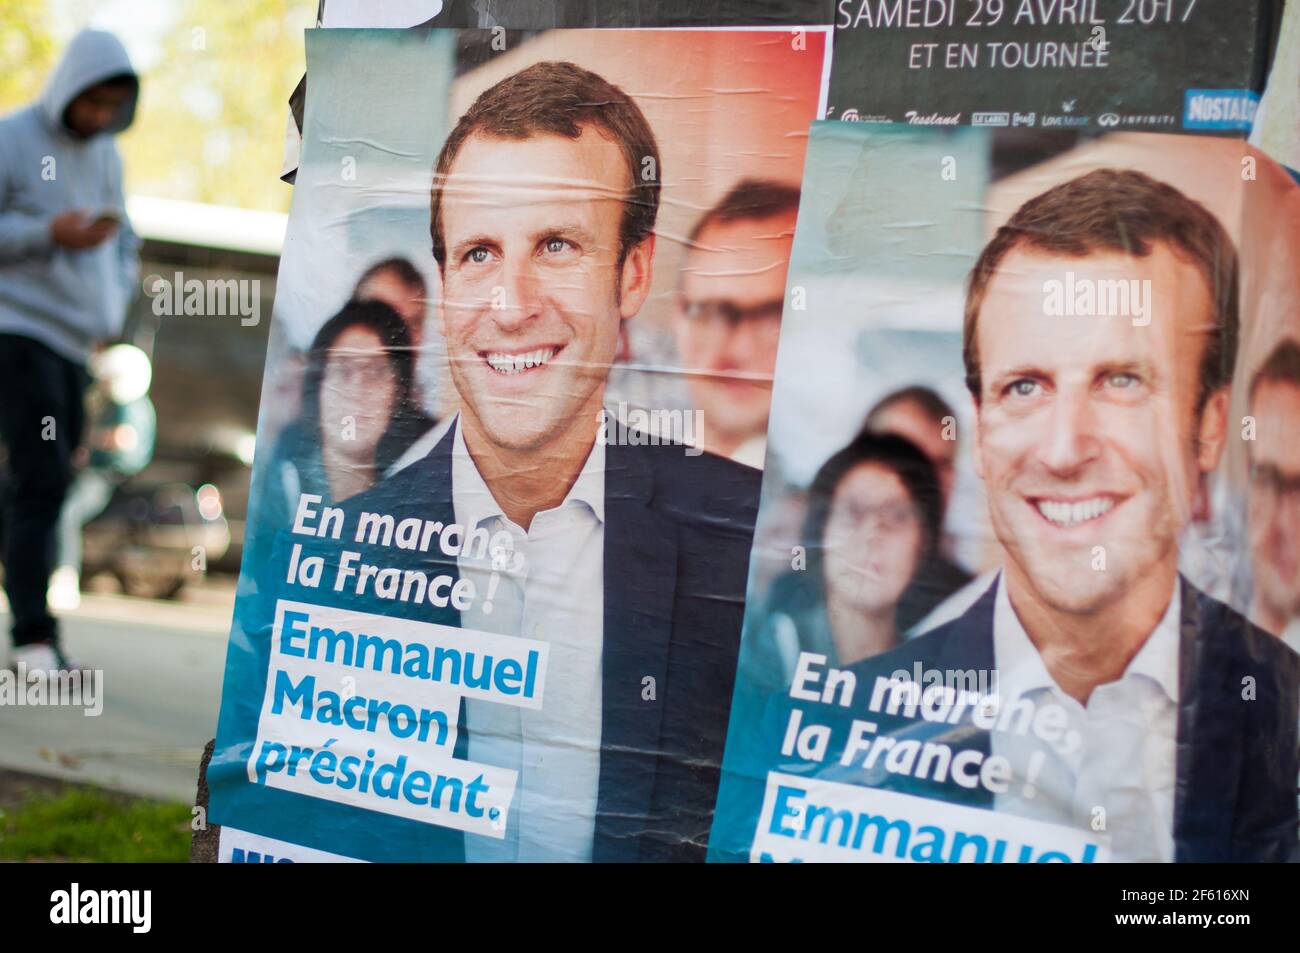 EMMANUEL MACRON GLOSSY POSTER PICTURE PHOTO PRINT french president france 3054